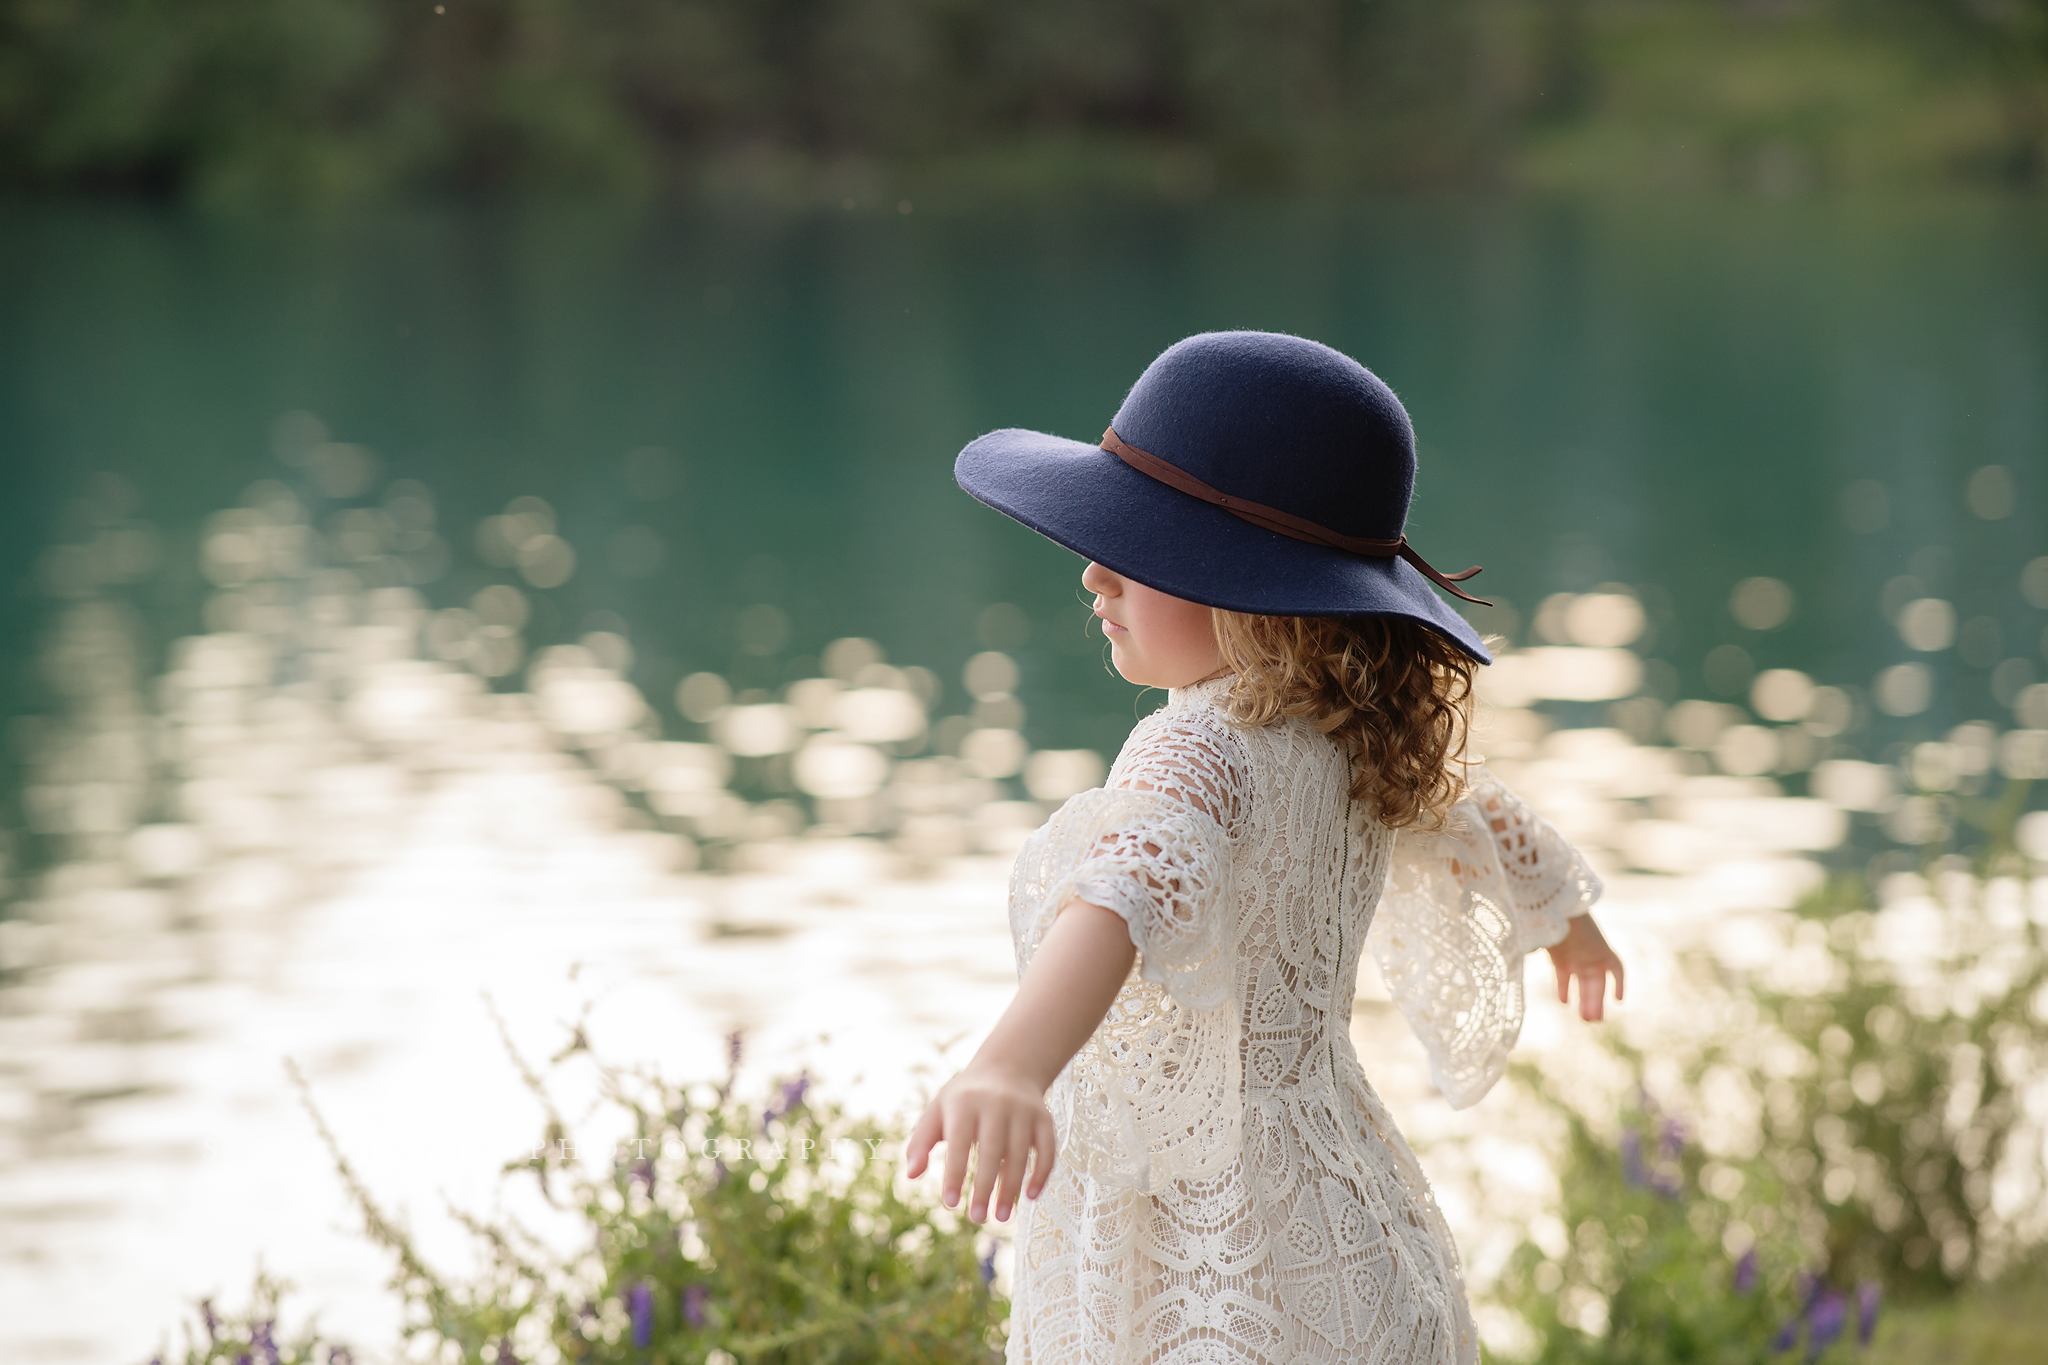 travel family photo session girl in lace dress by lake spinning with hat